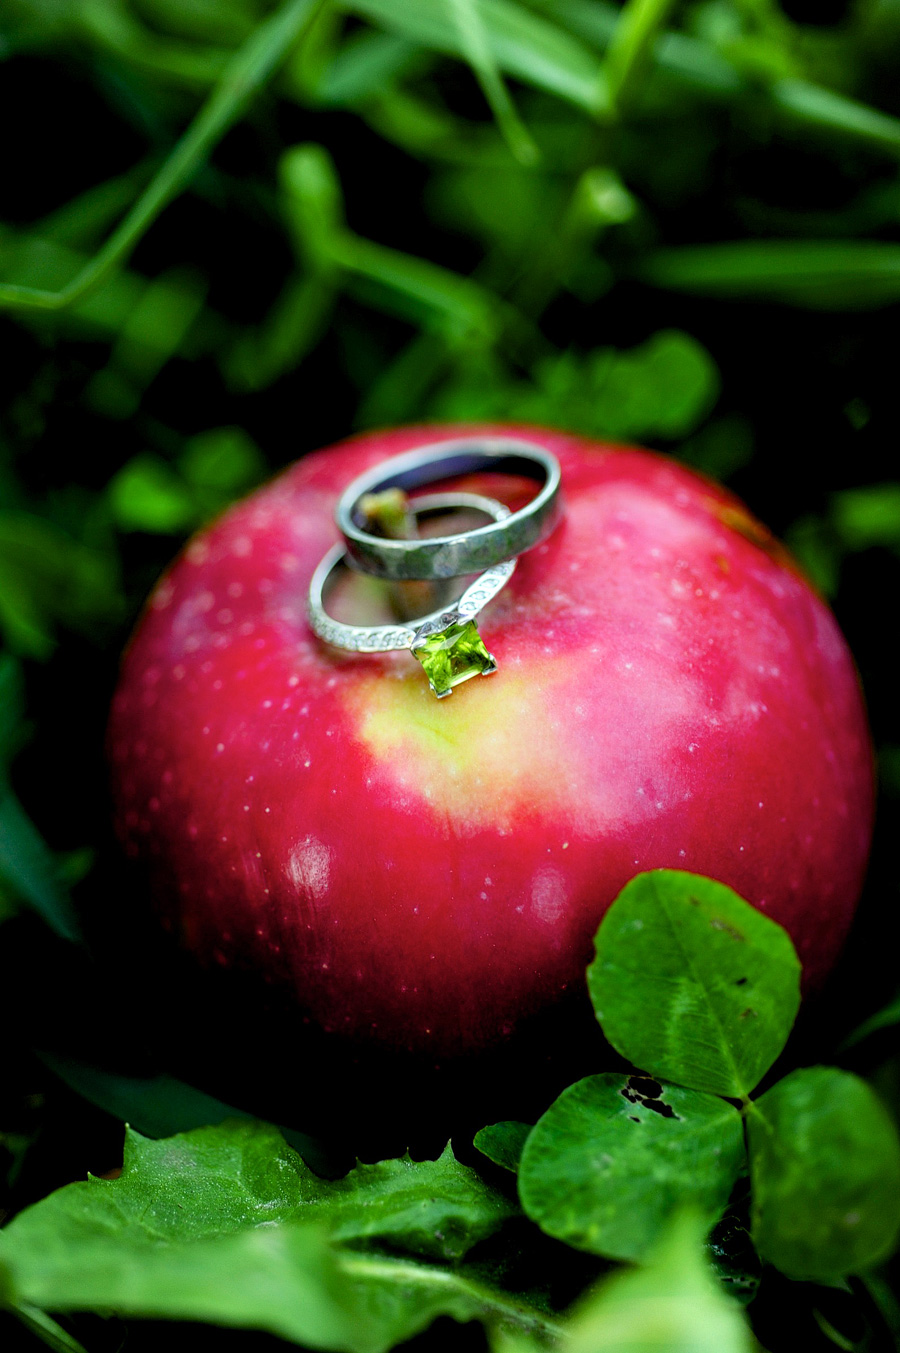 Alisa & Kim's stunning engagement rings! We did part of the session at an apple orchard, so it seemed appropriate. :)